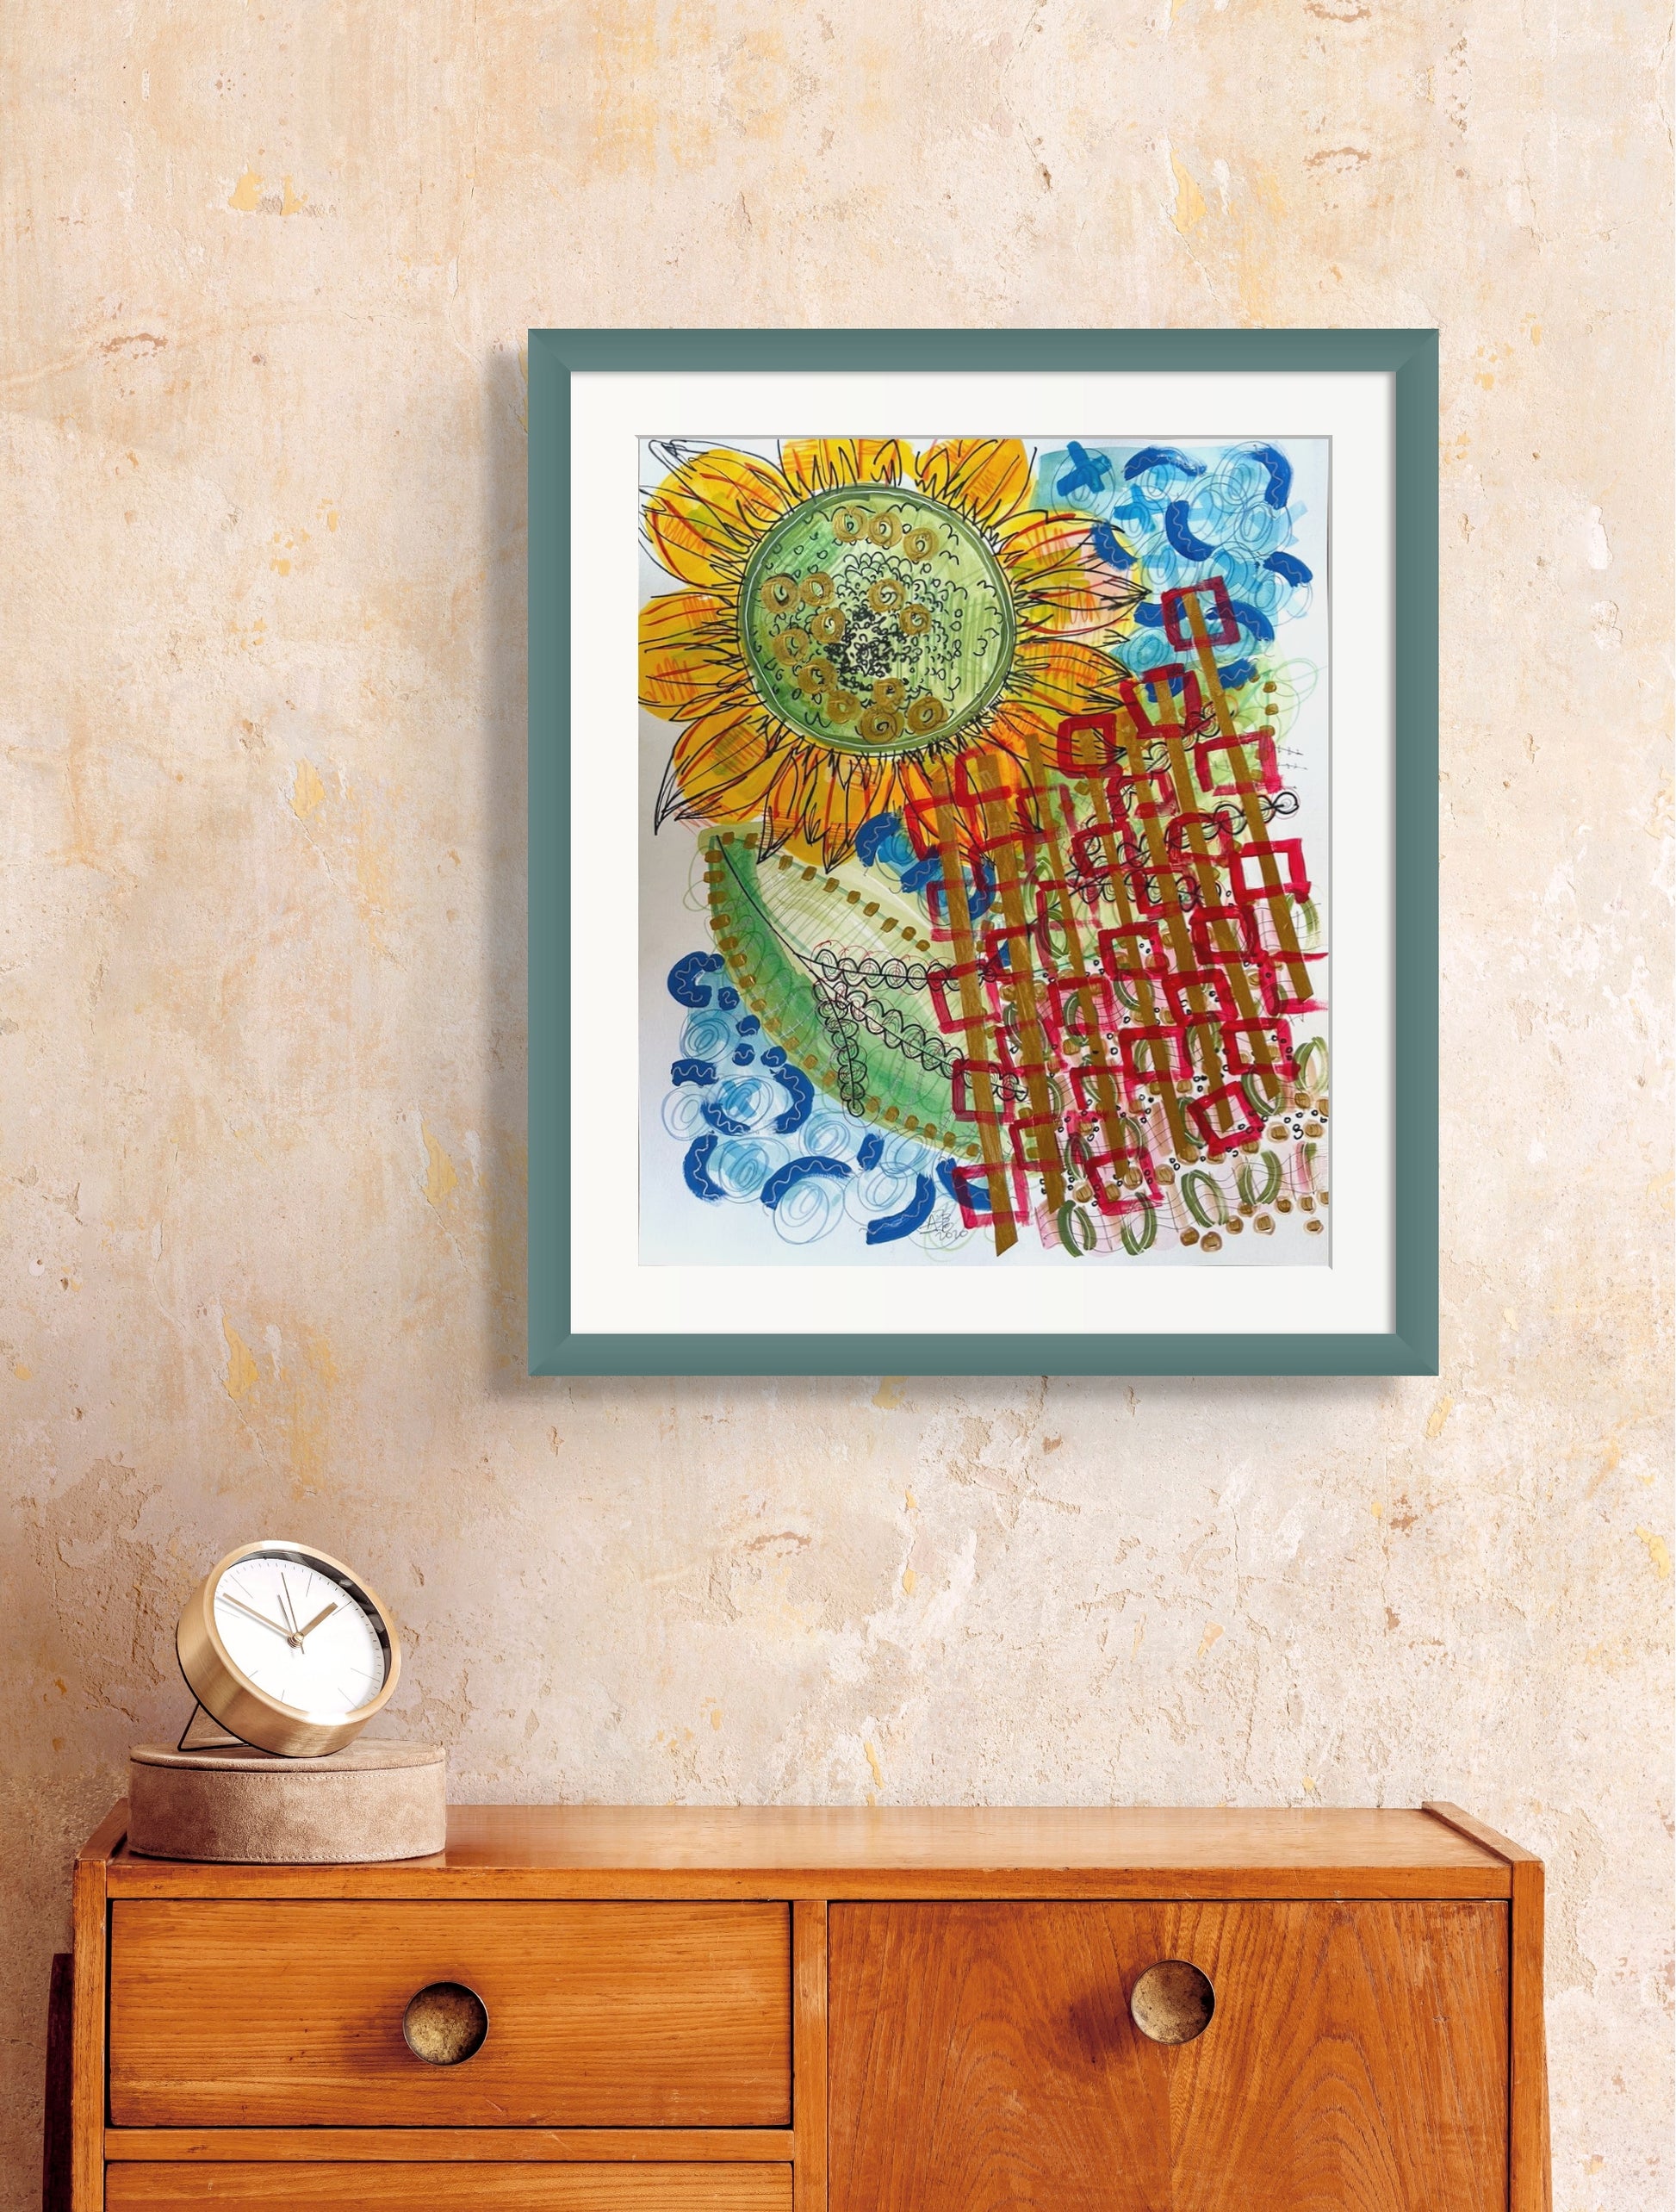 Colorful mixed media abstract and graphic design titled Sunflower at Sea by artist Jenifer Hernandez., framed for display only in blue painted wood and white mat.